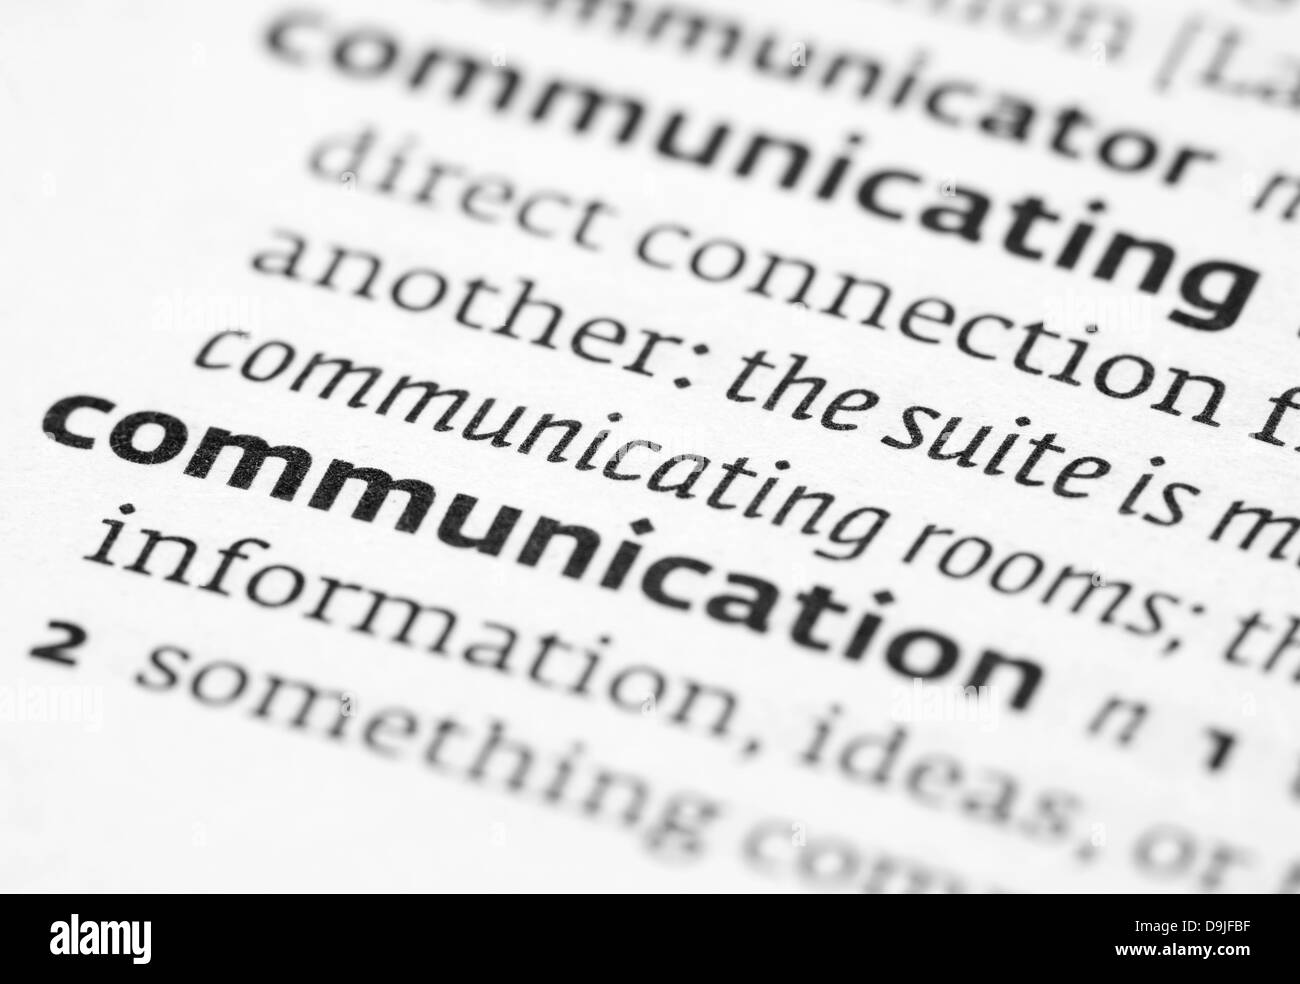 Communication definition in a dictionary Stock Photo